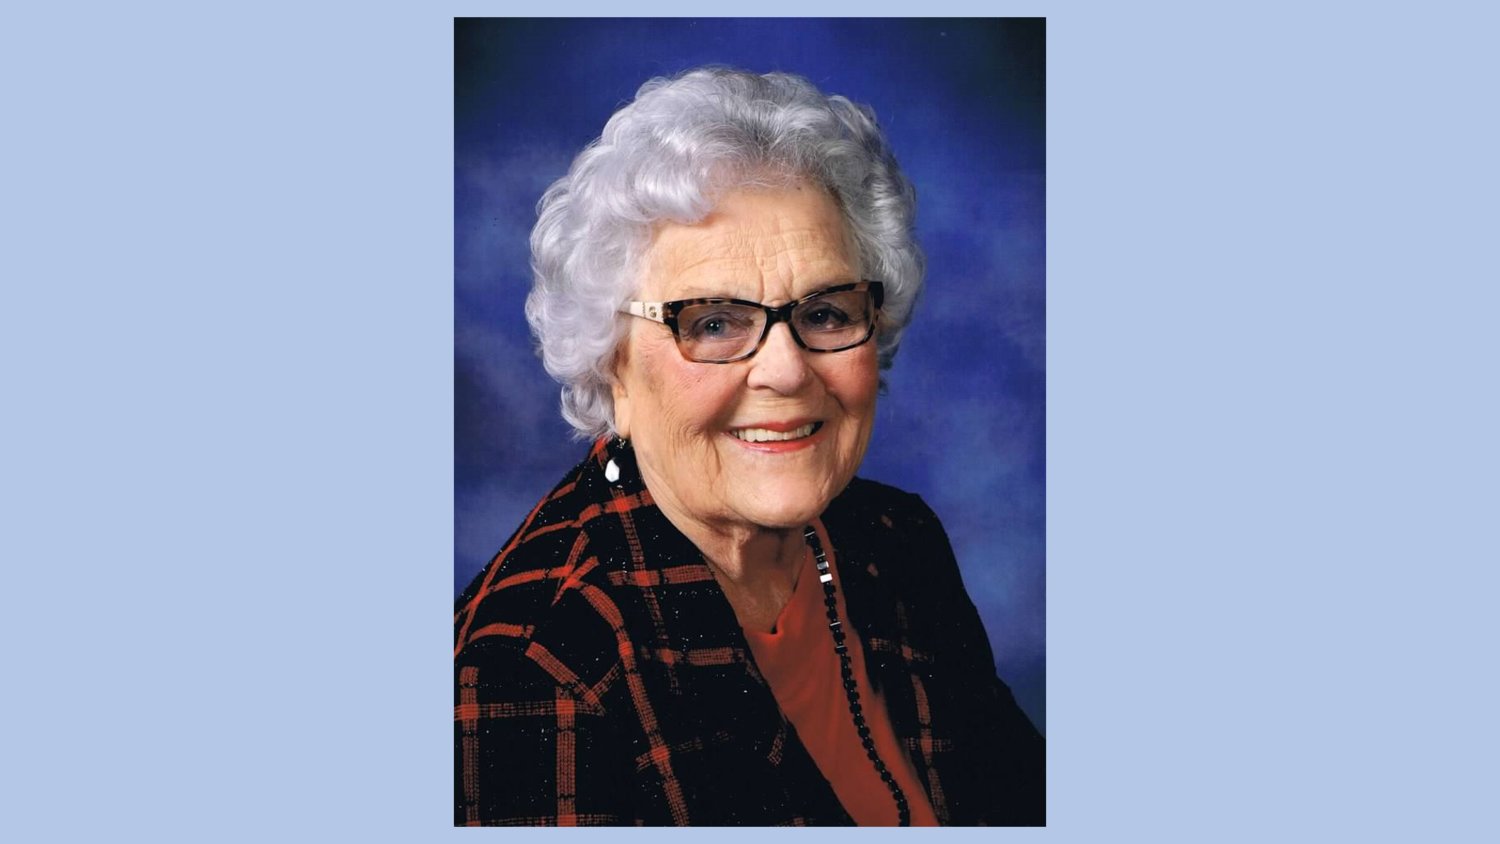 Coral Jan “Skipper” Scroggins passed Jan. 12 at the age of 94 on what was her father's birthday. She was a graduate of the University of Texas at Austin with a degree in business administration. She was an active member of First United Methodist Church in Katy and was very active in the community in general. She is survived by several family members and a wide community of friends and loved ones that miss her dearly.